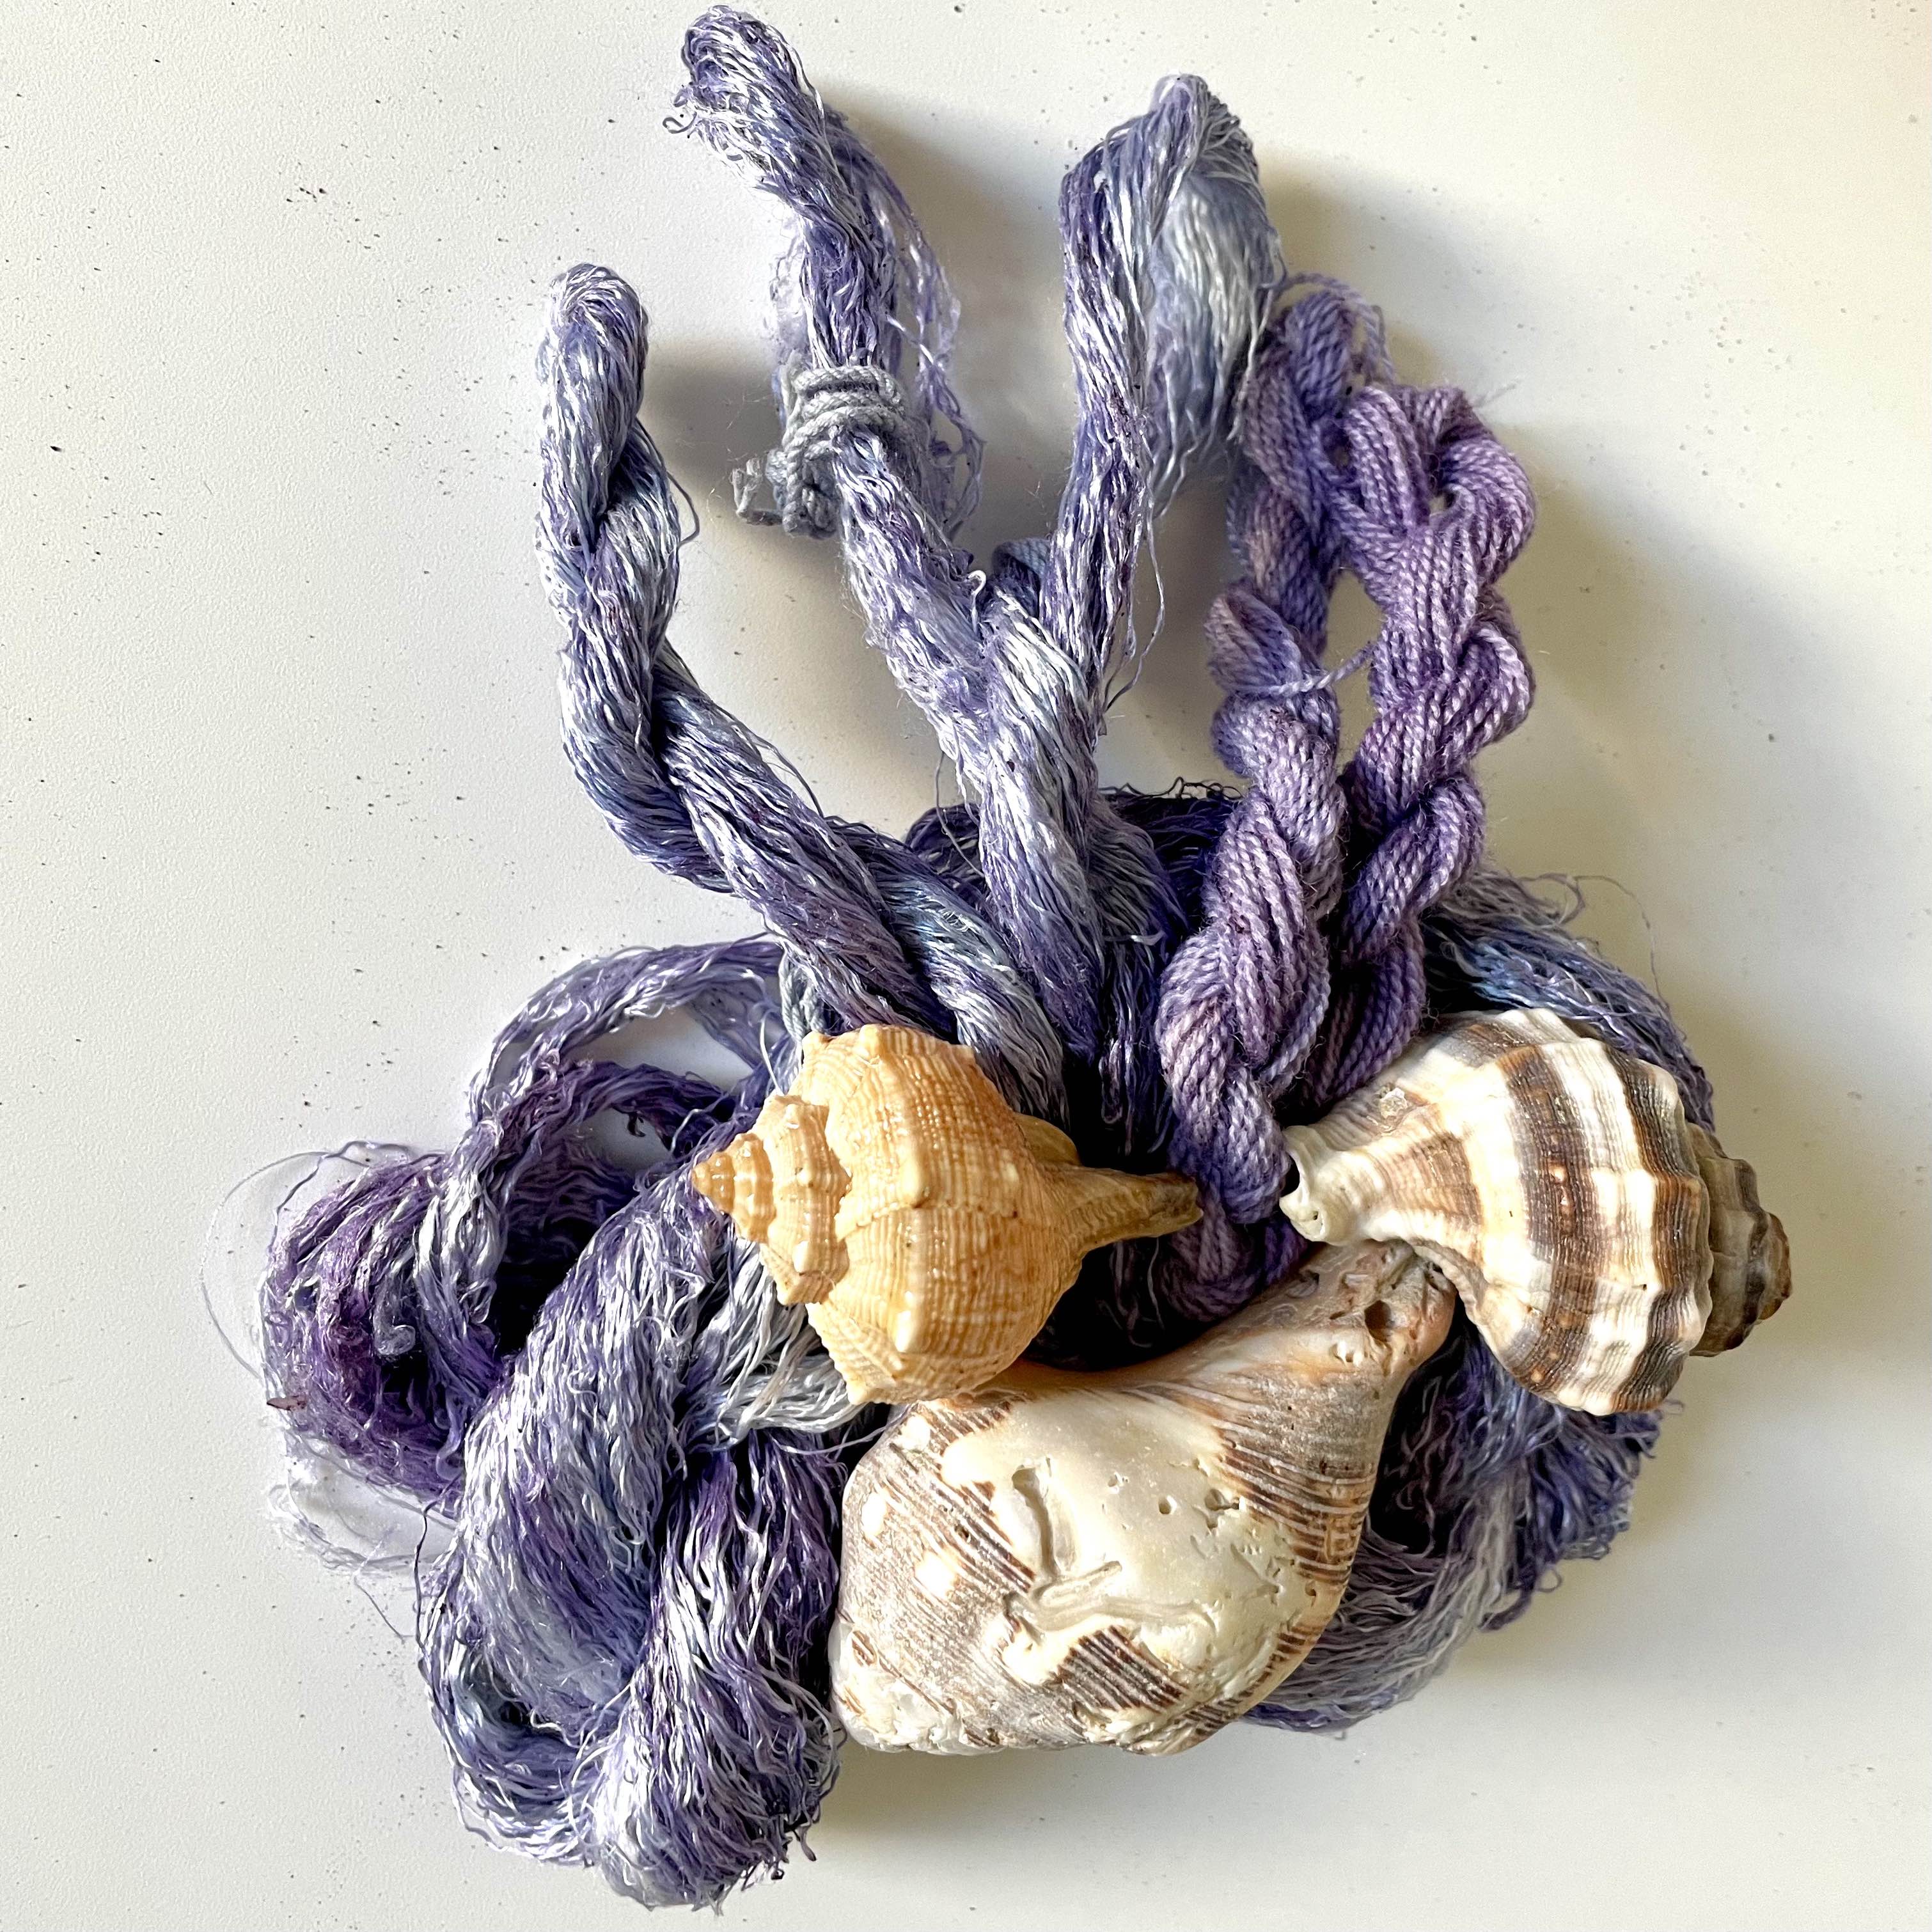 Silk and wool dyed with mollusc dyes, and shells of the three types of molluscs